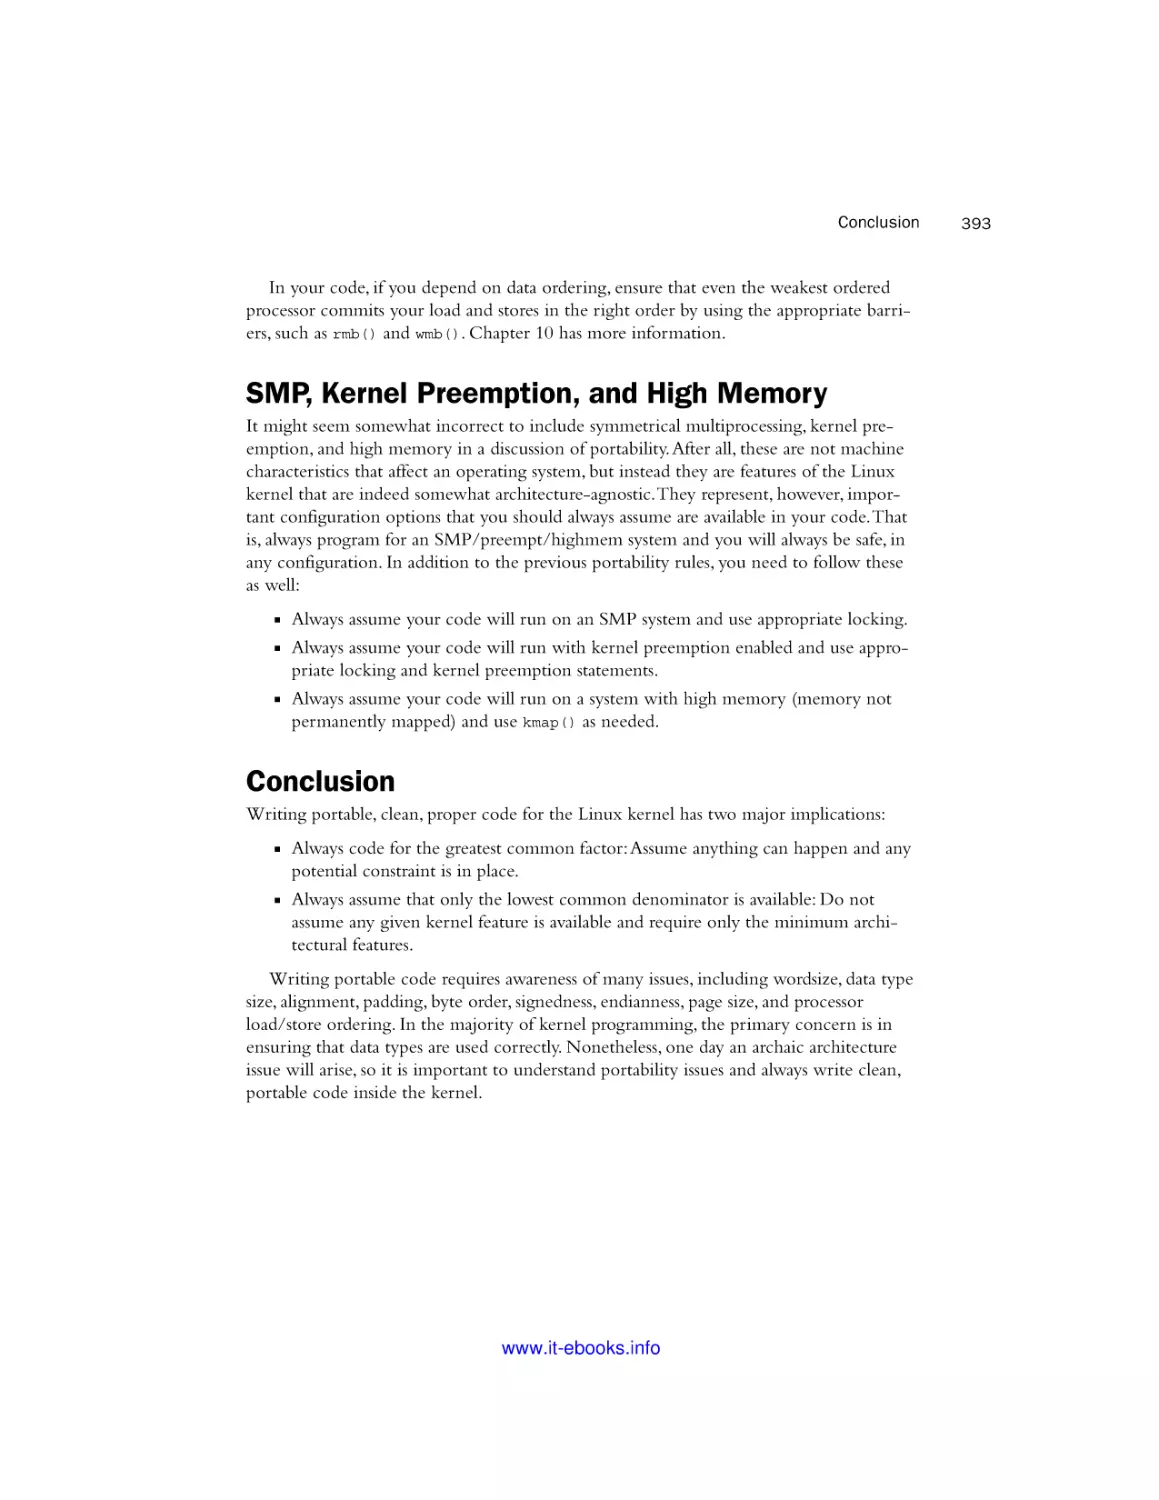 SMP, Kernel Preemption, and High Memory
Conclusion